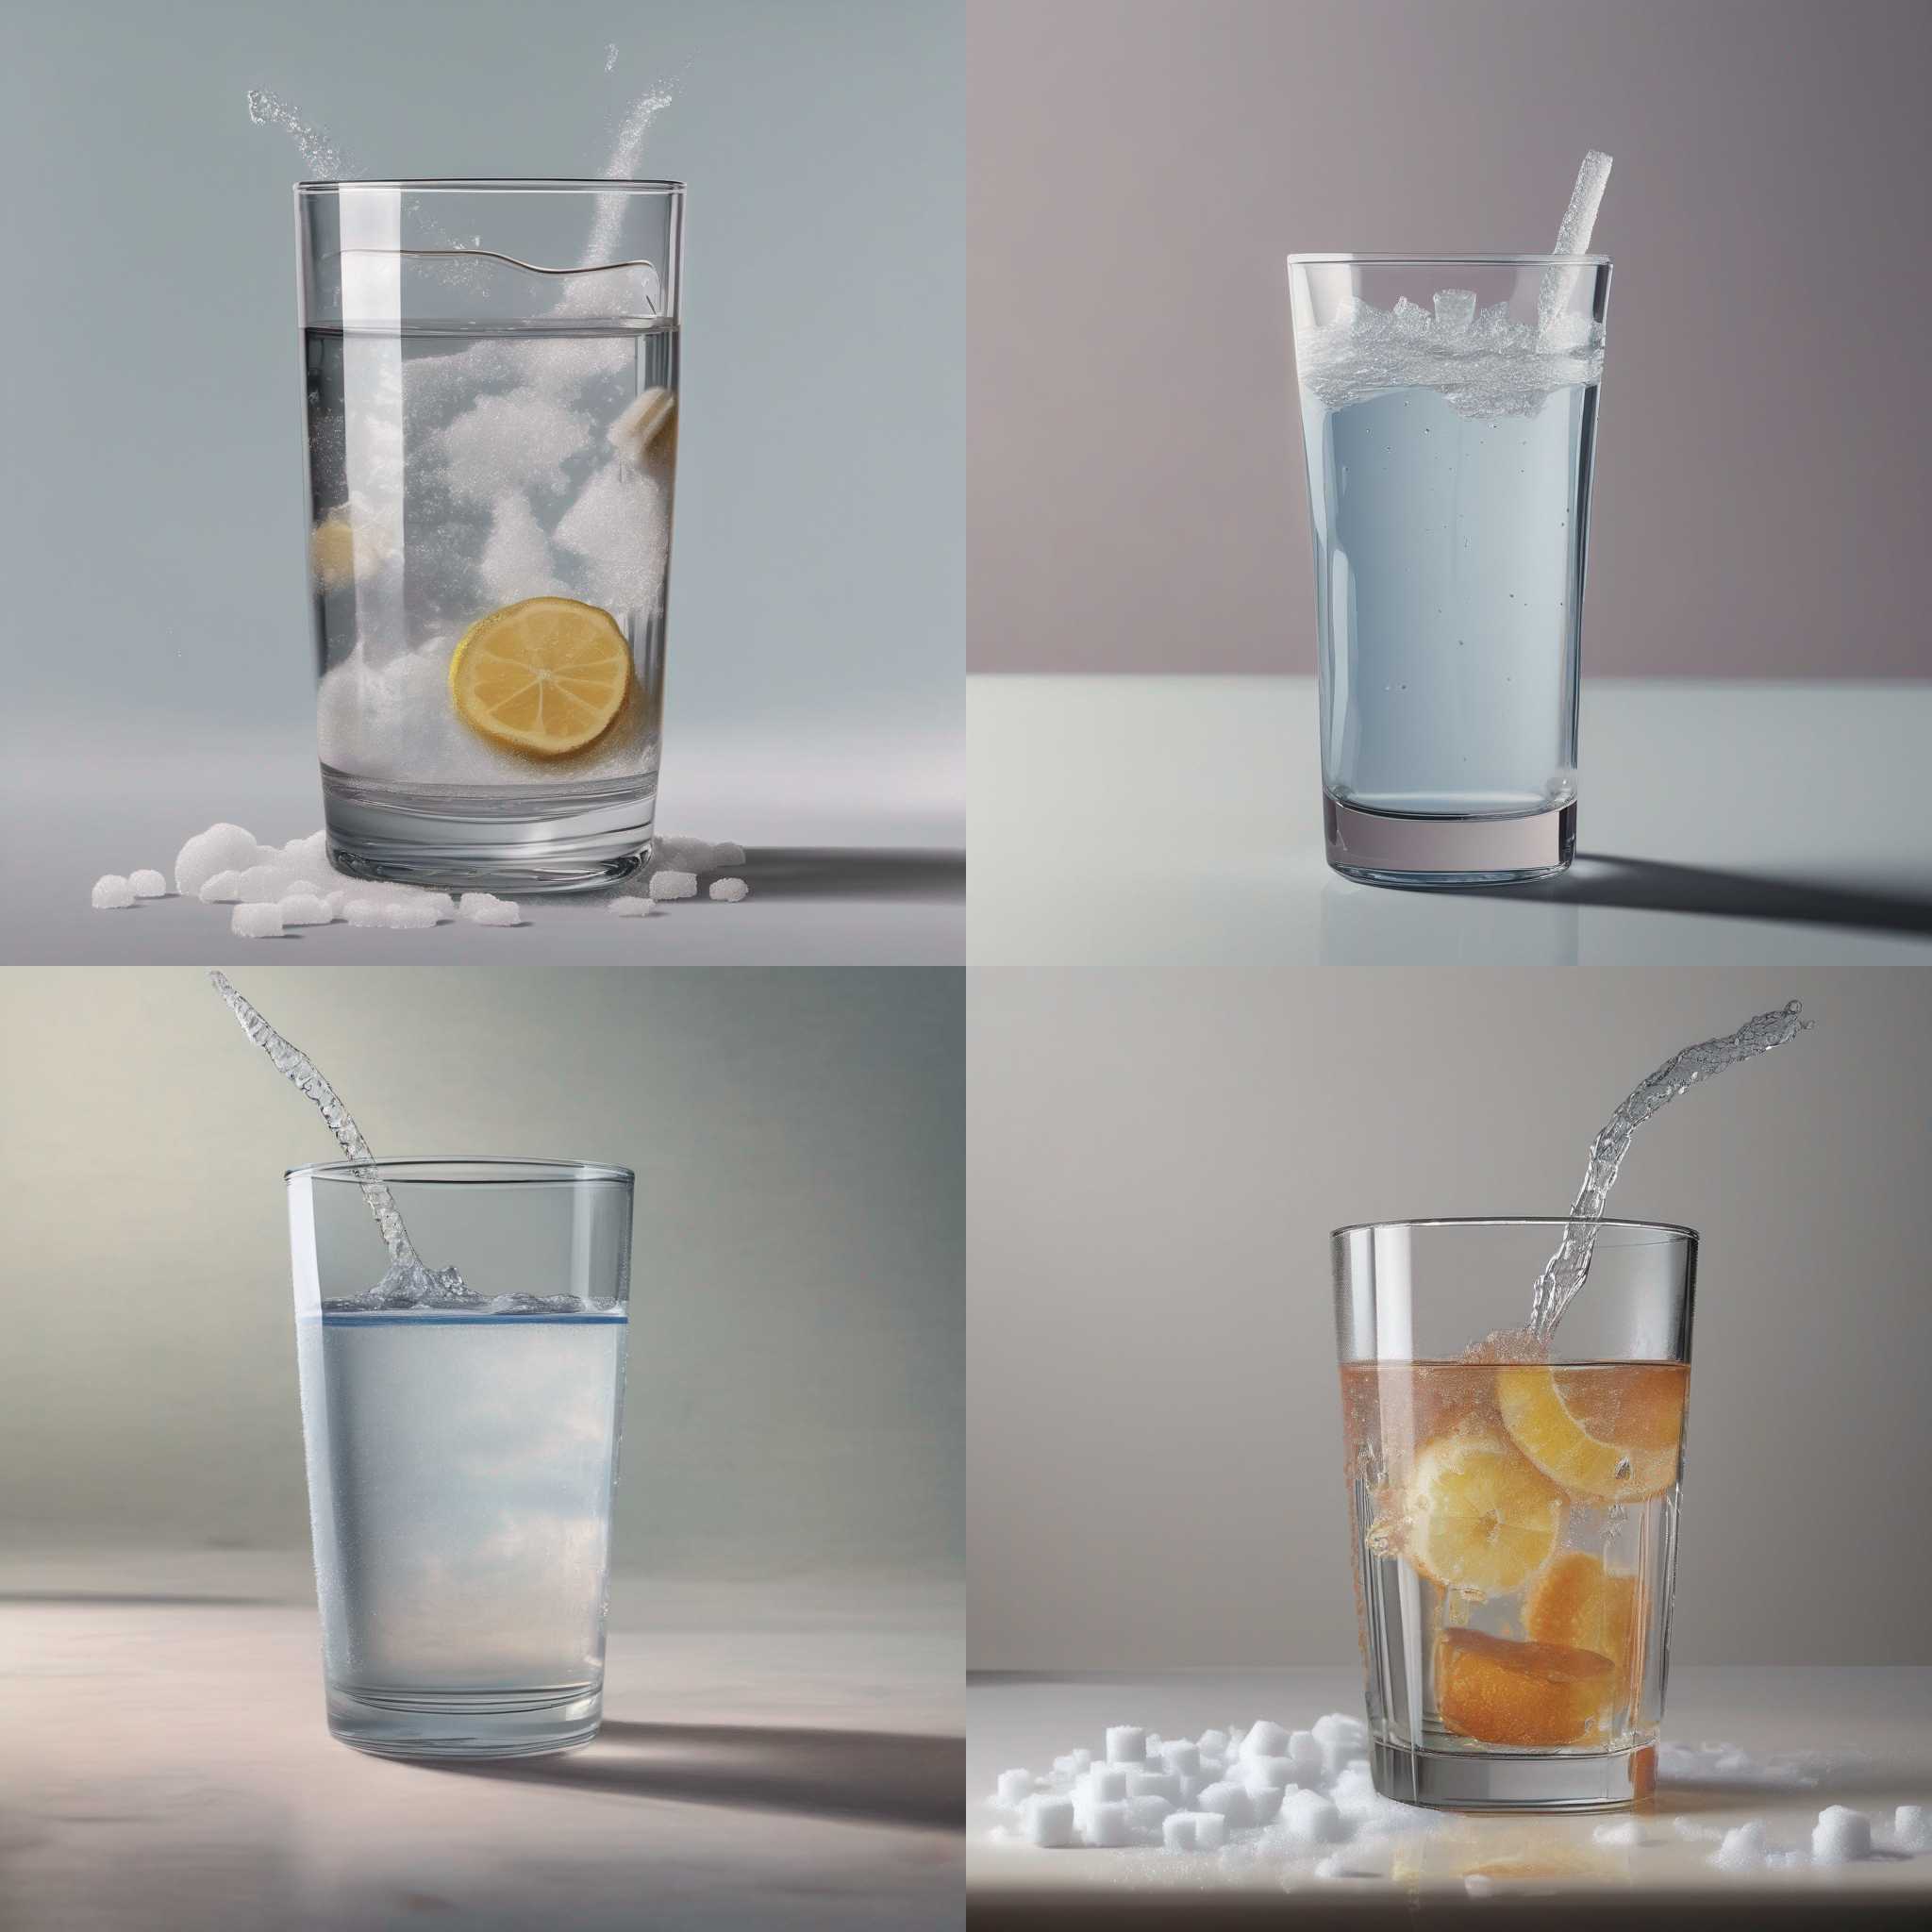 A glass of water mixed with sugar